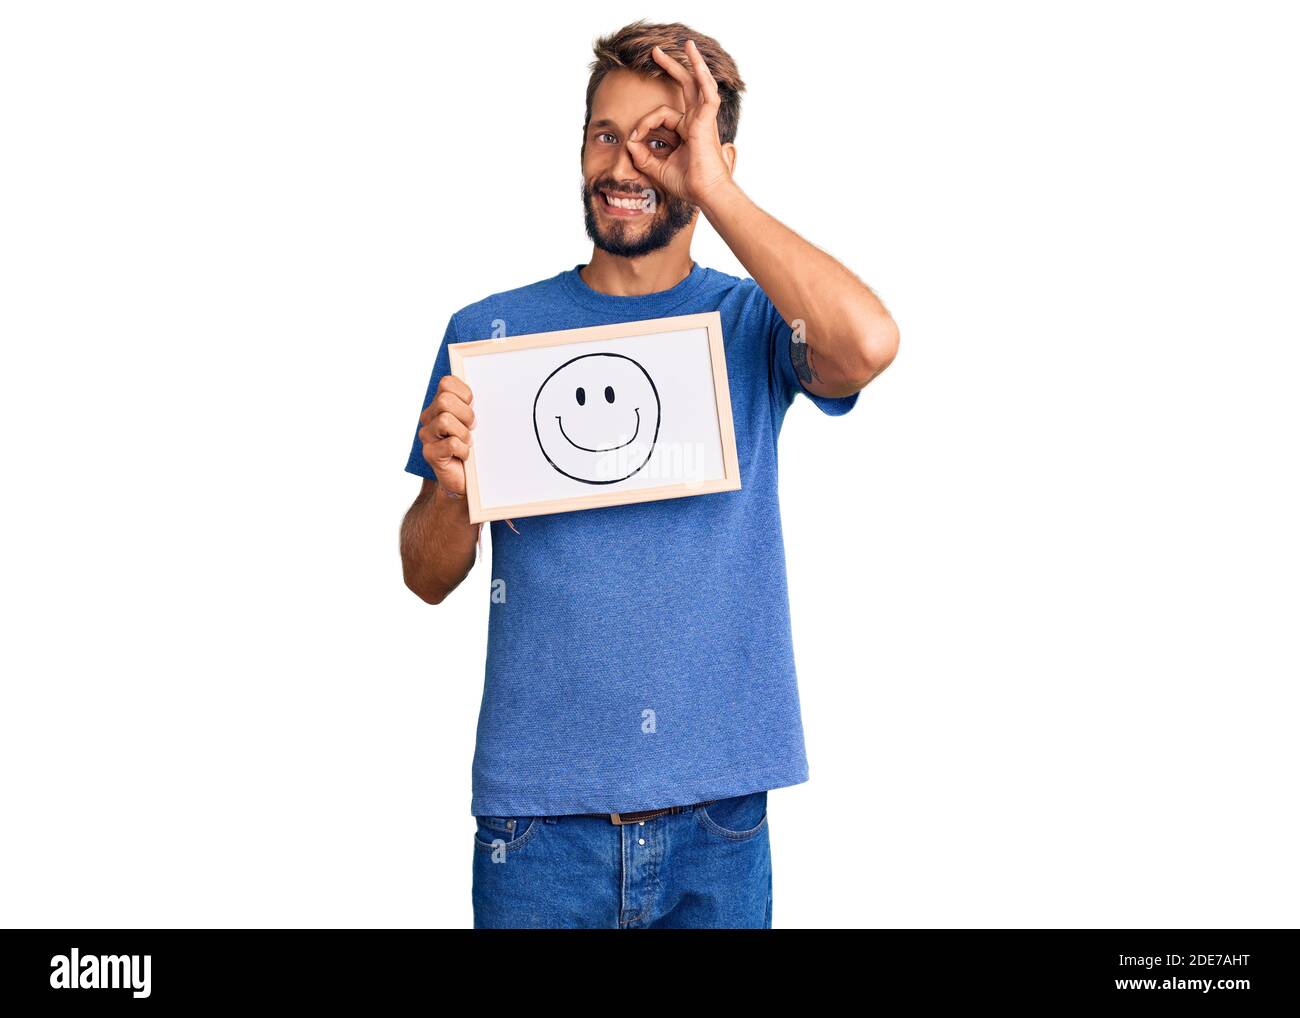 Handsome blond man with beard holding blackboard with happy face smiling happy doing ok sign with hand on eye looking through fingers Stock Photo